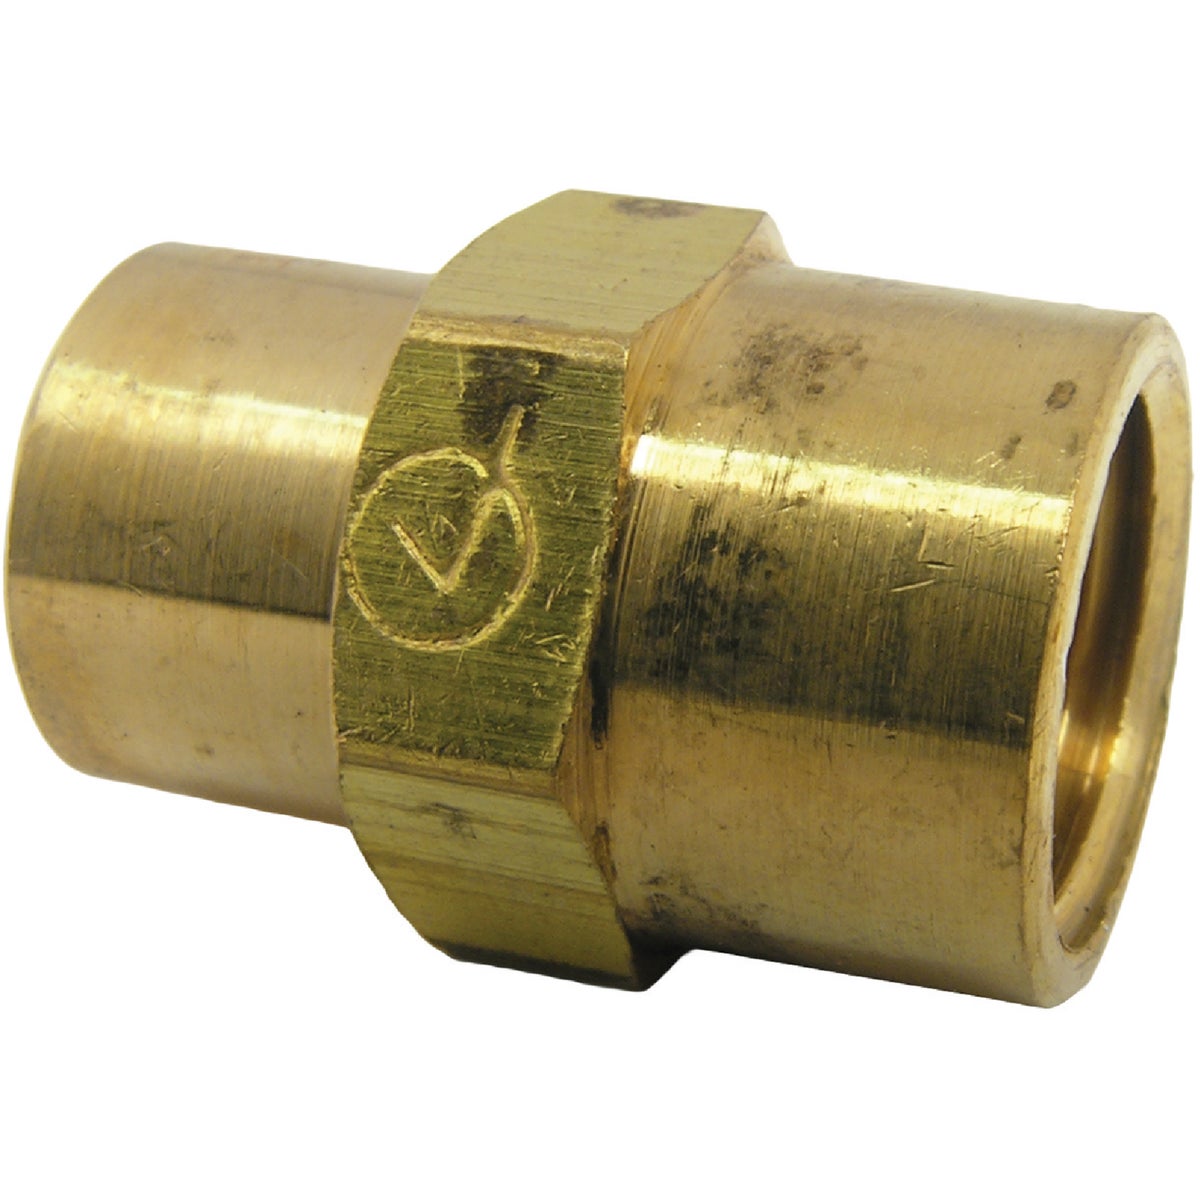 Lasco 1/4 In. FPT x 1/8 In. FPT Yellow Brass Reducing Coupling